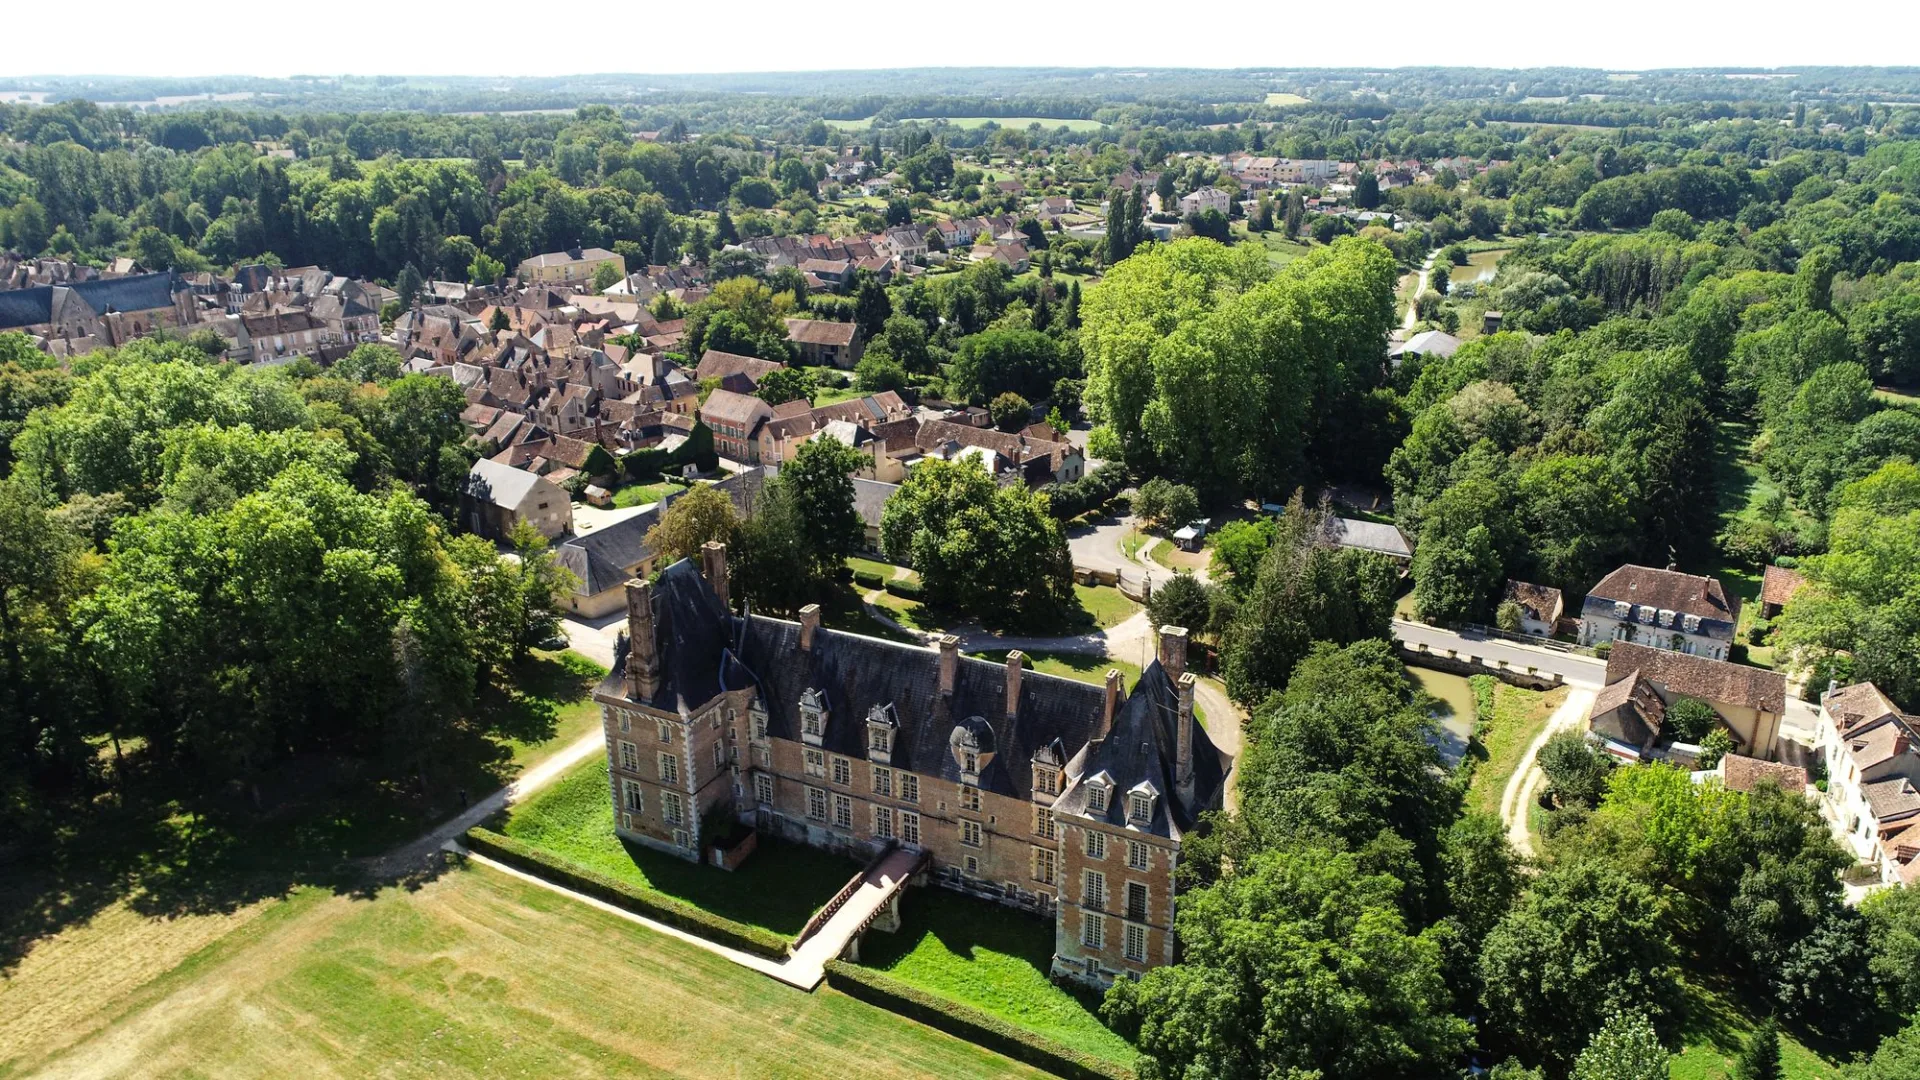 Aerial view of the village of Saint-Amand-en-Puisaye